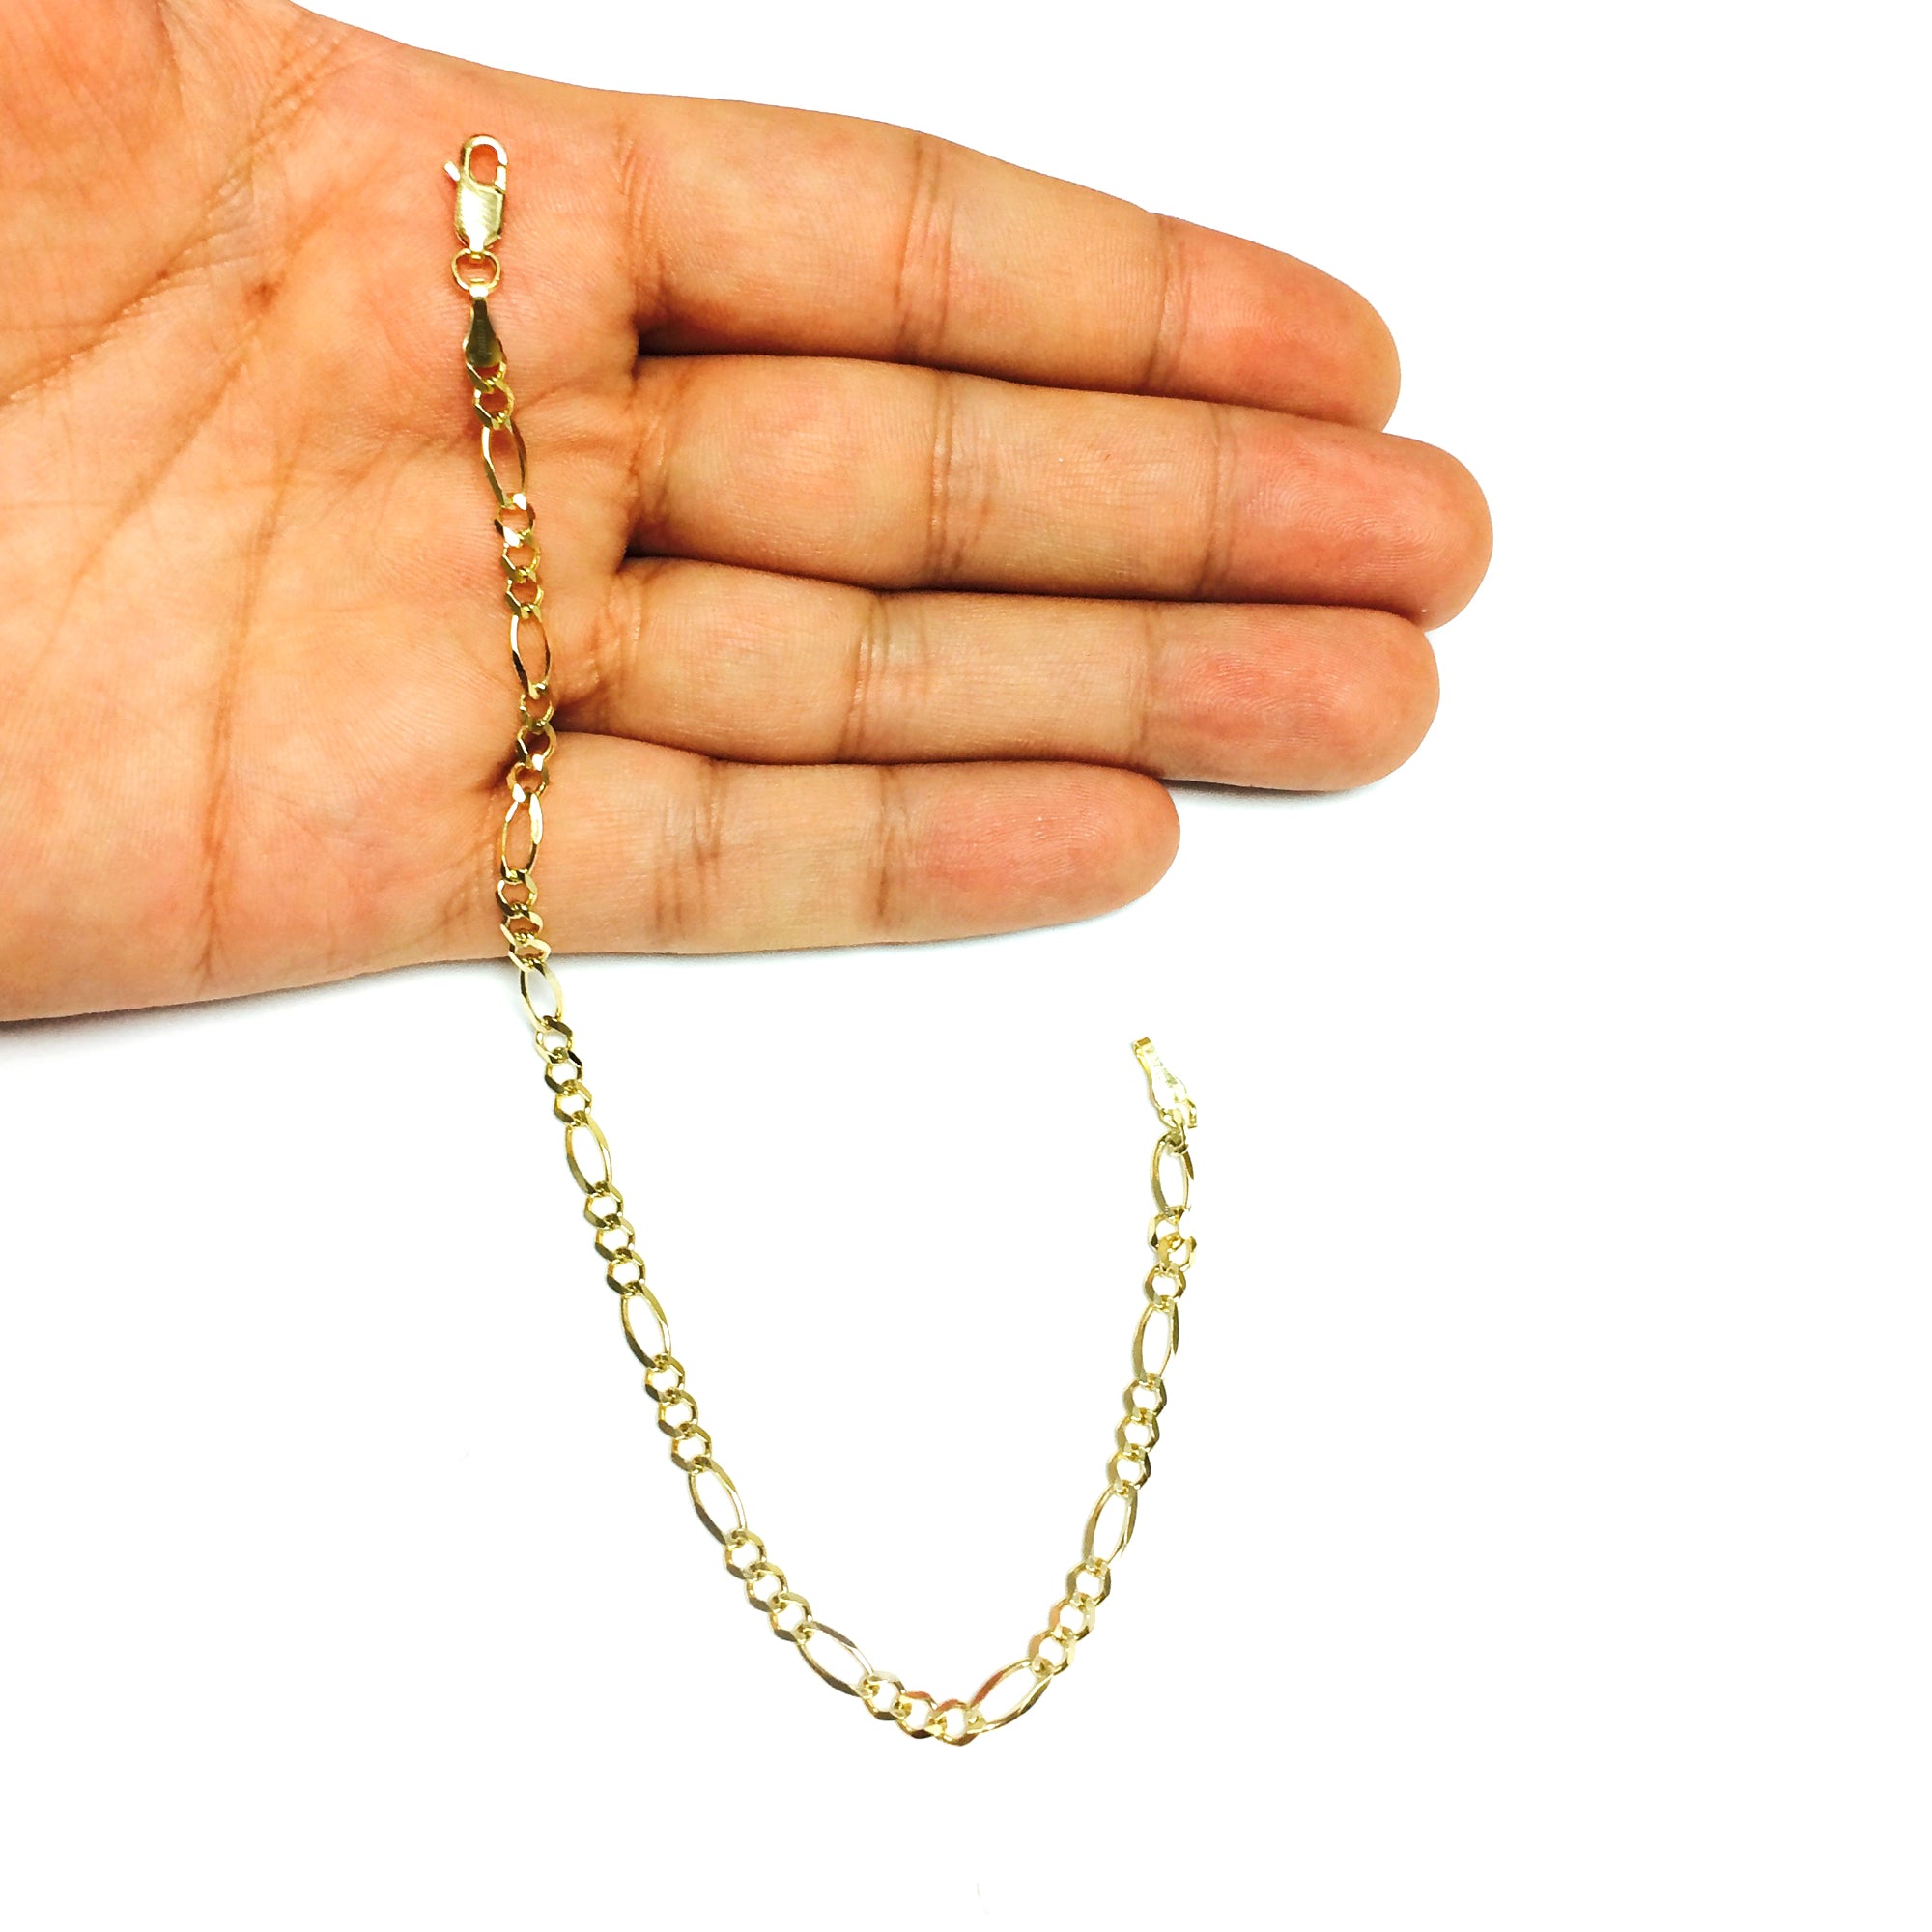 10k Yellow Solid Gold Figaro Chain Bracelet, 4.0mm, 8" fine designer jewelry for men and women